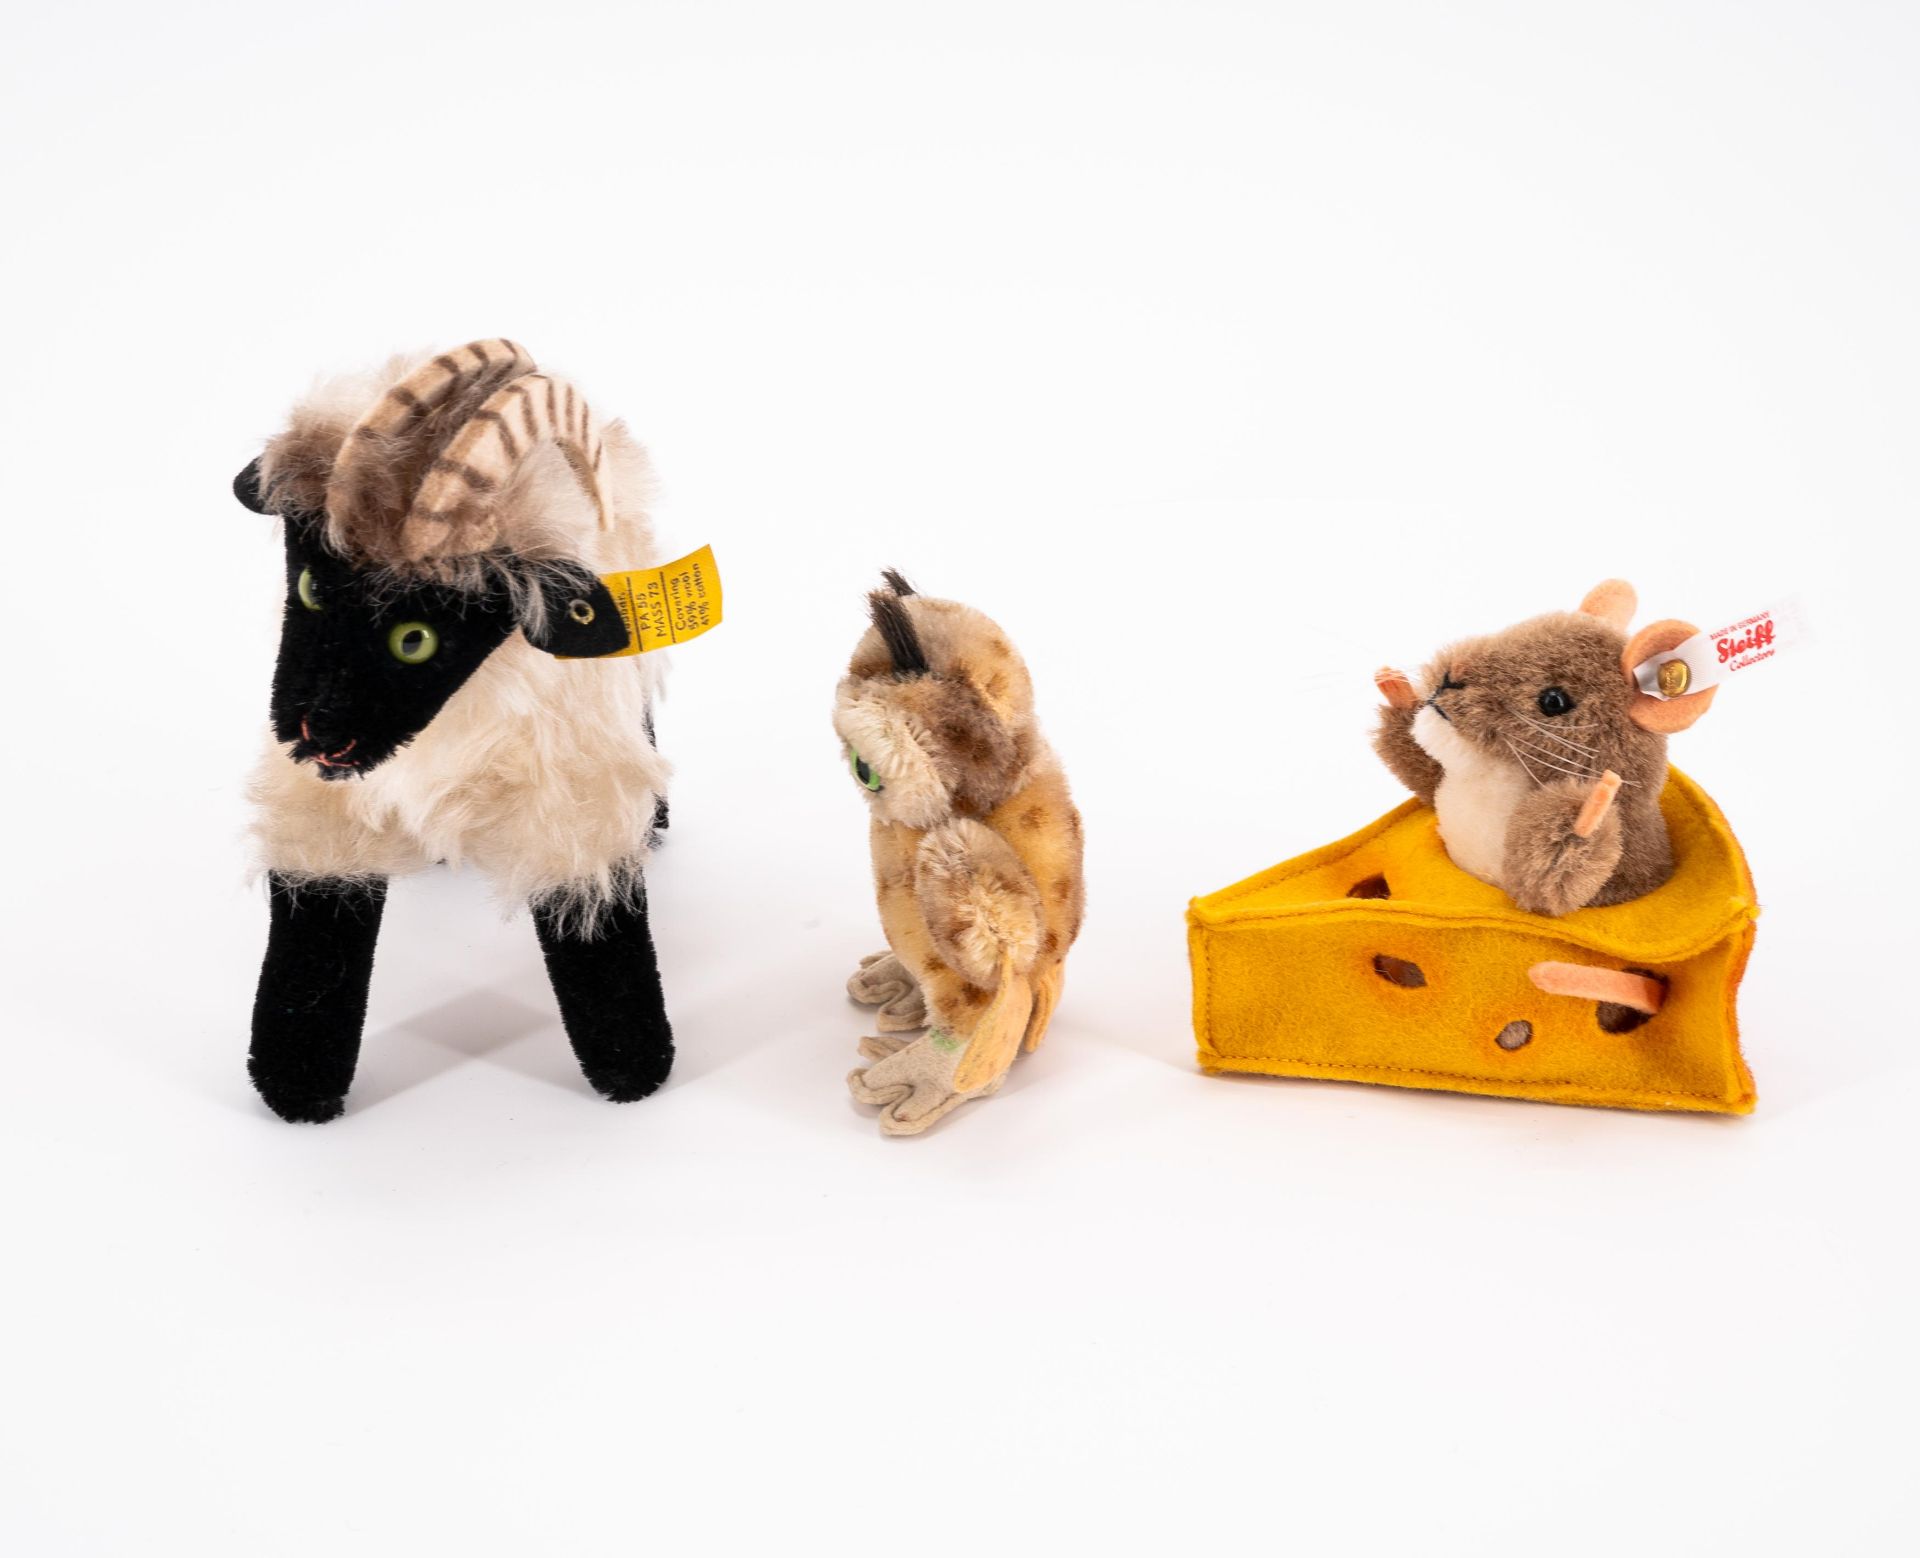 Steiff: ENSEMBLE OF FOUR STEIFF ANIMALS MADE OF FABRIC, COTTON WOOL AND WOOD - Image 6 of 10